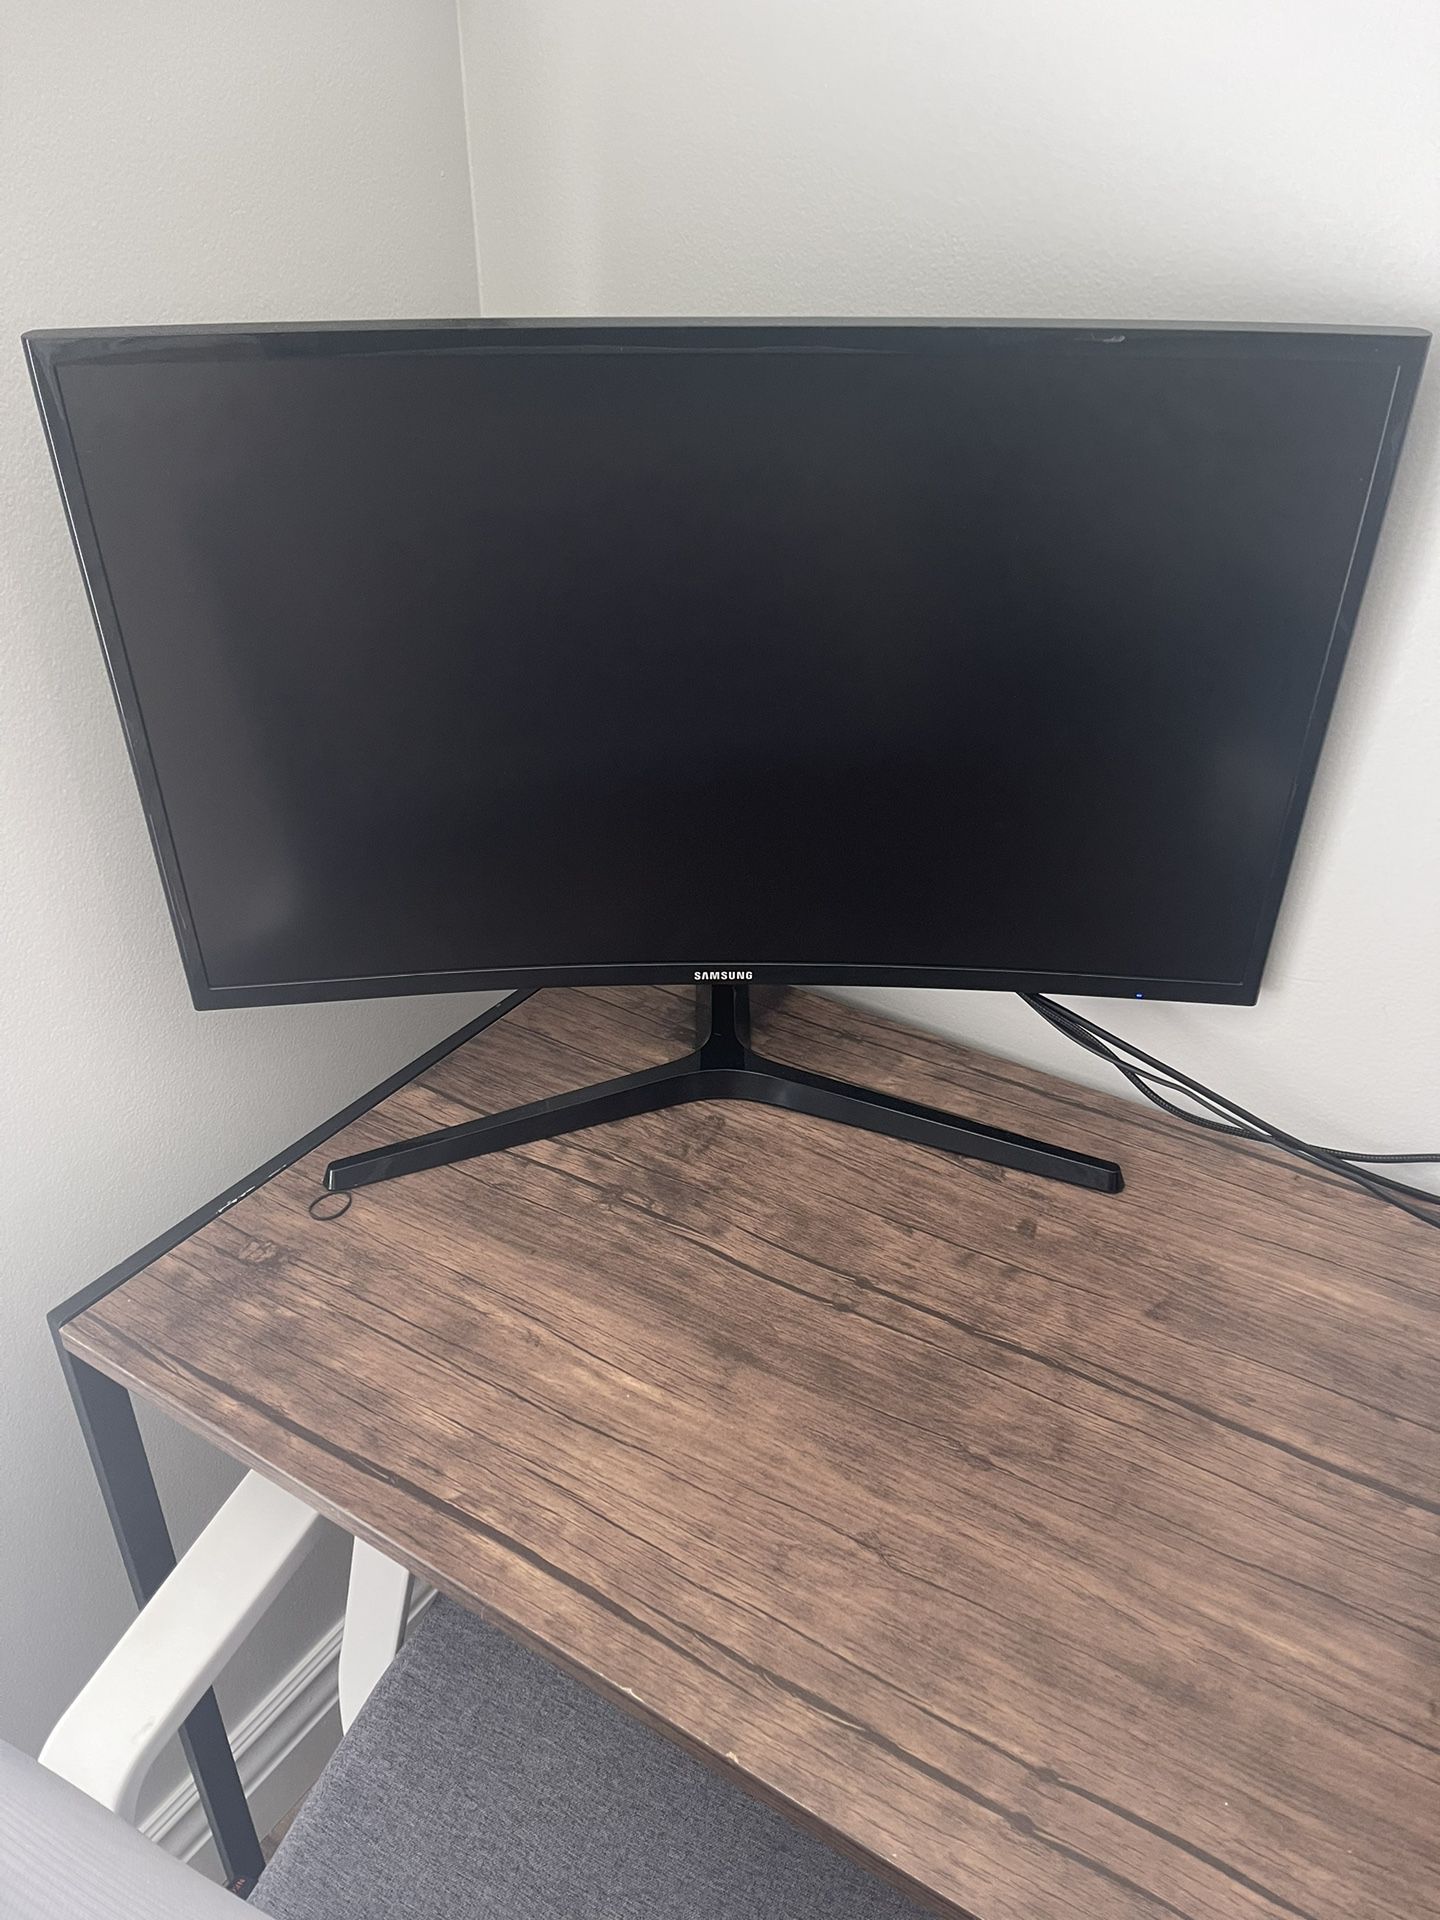 27” Samsung monitor For Sale